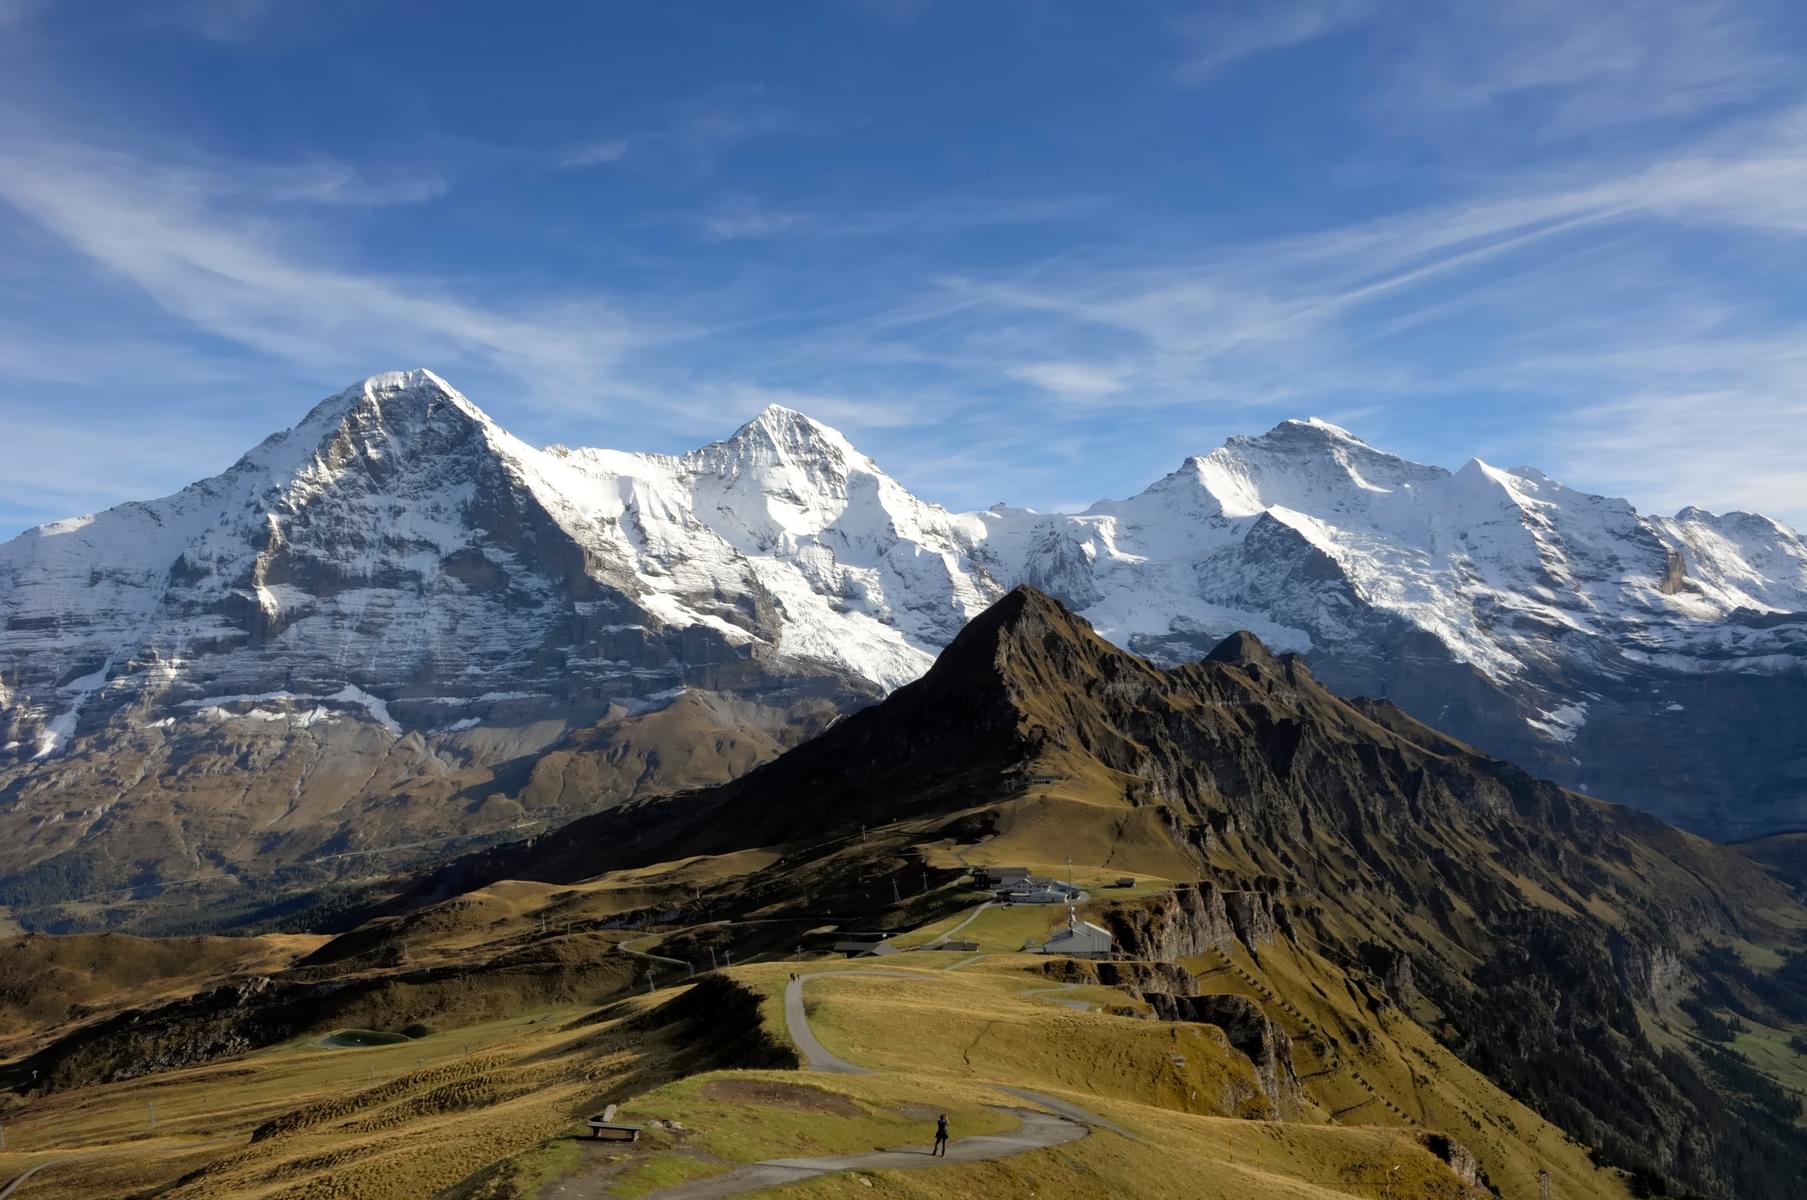 Admire the majestic Eiger, Mönch, and Jungfrau peaks in all their glory